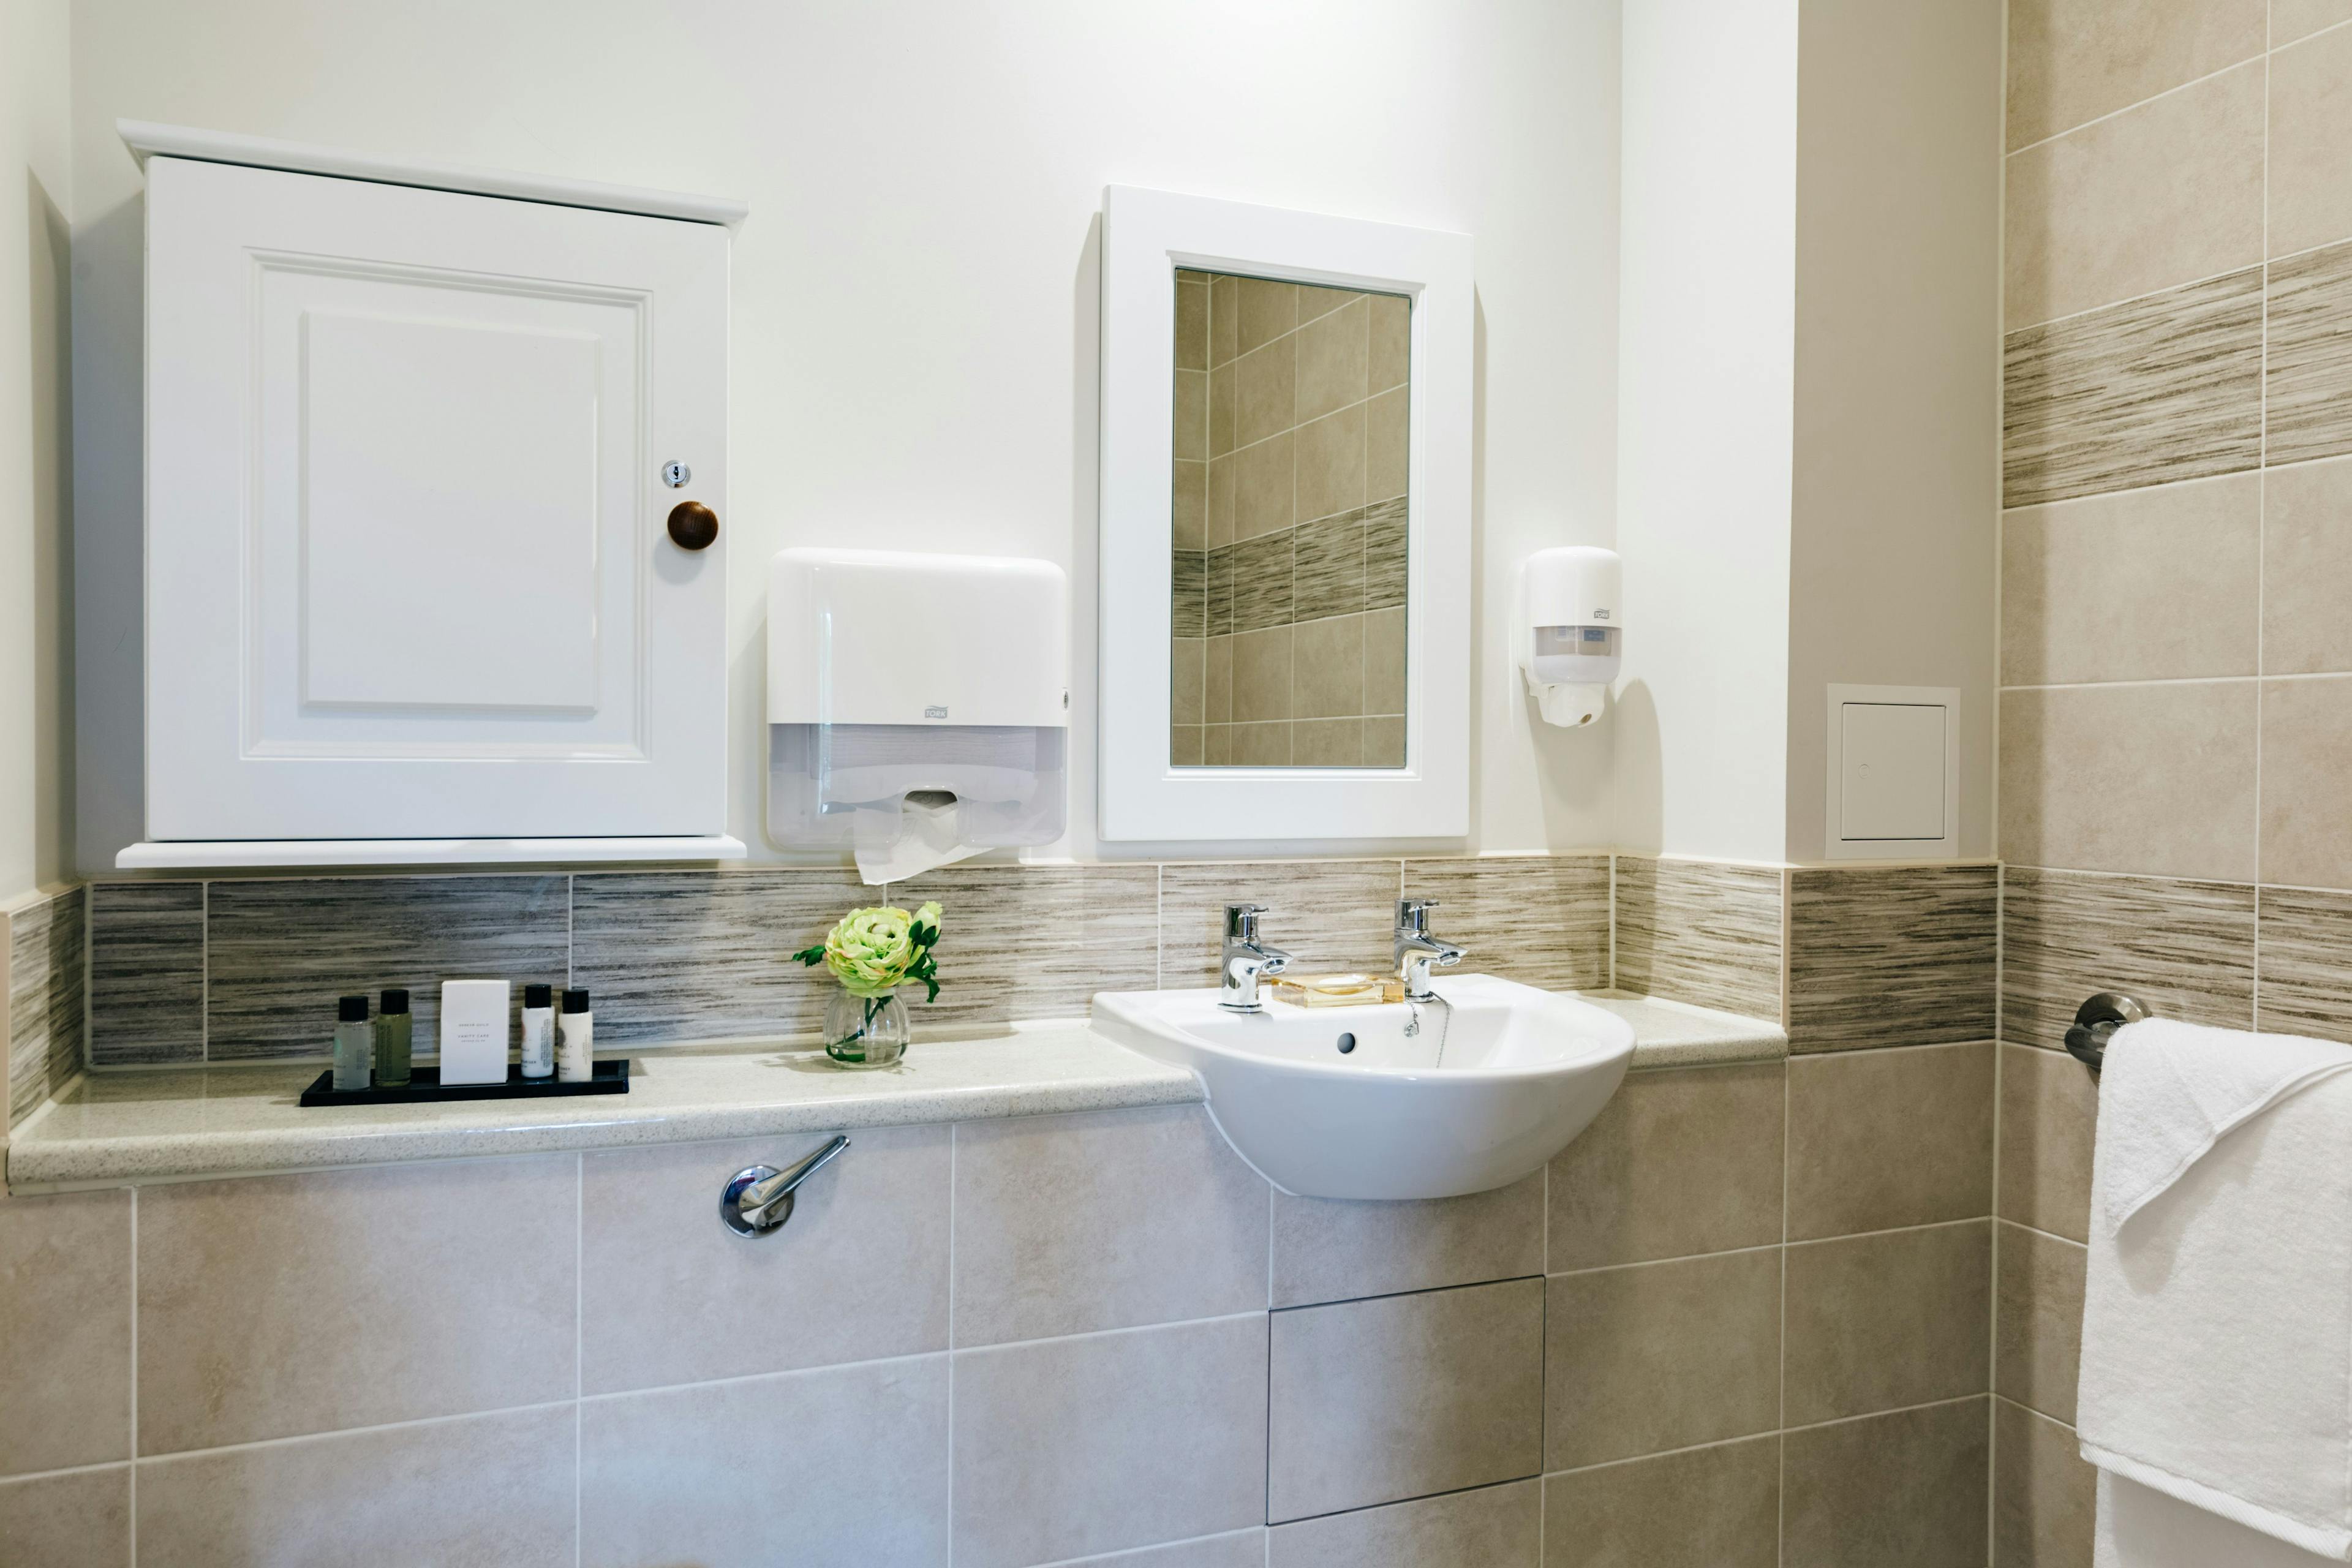 Bathroom at Raleigh Care Home in Exmouth, Devon